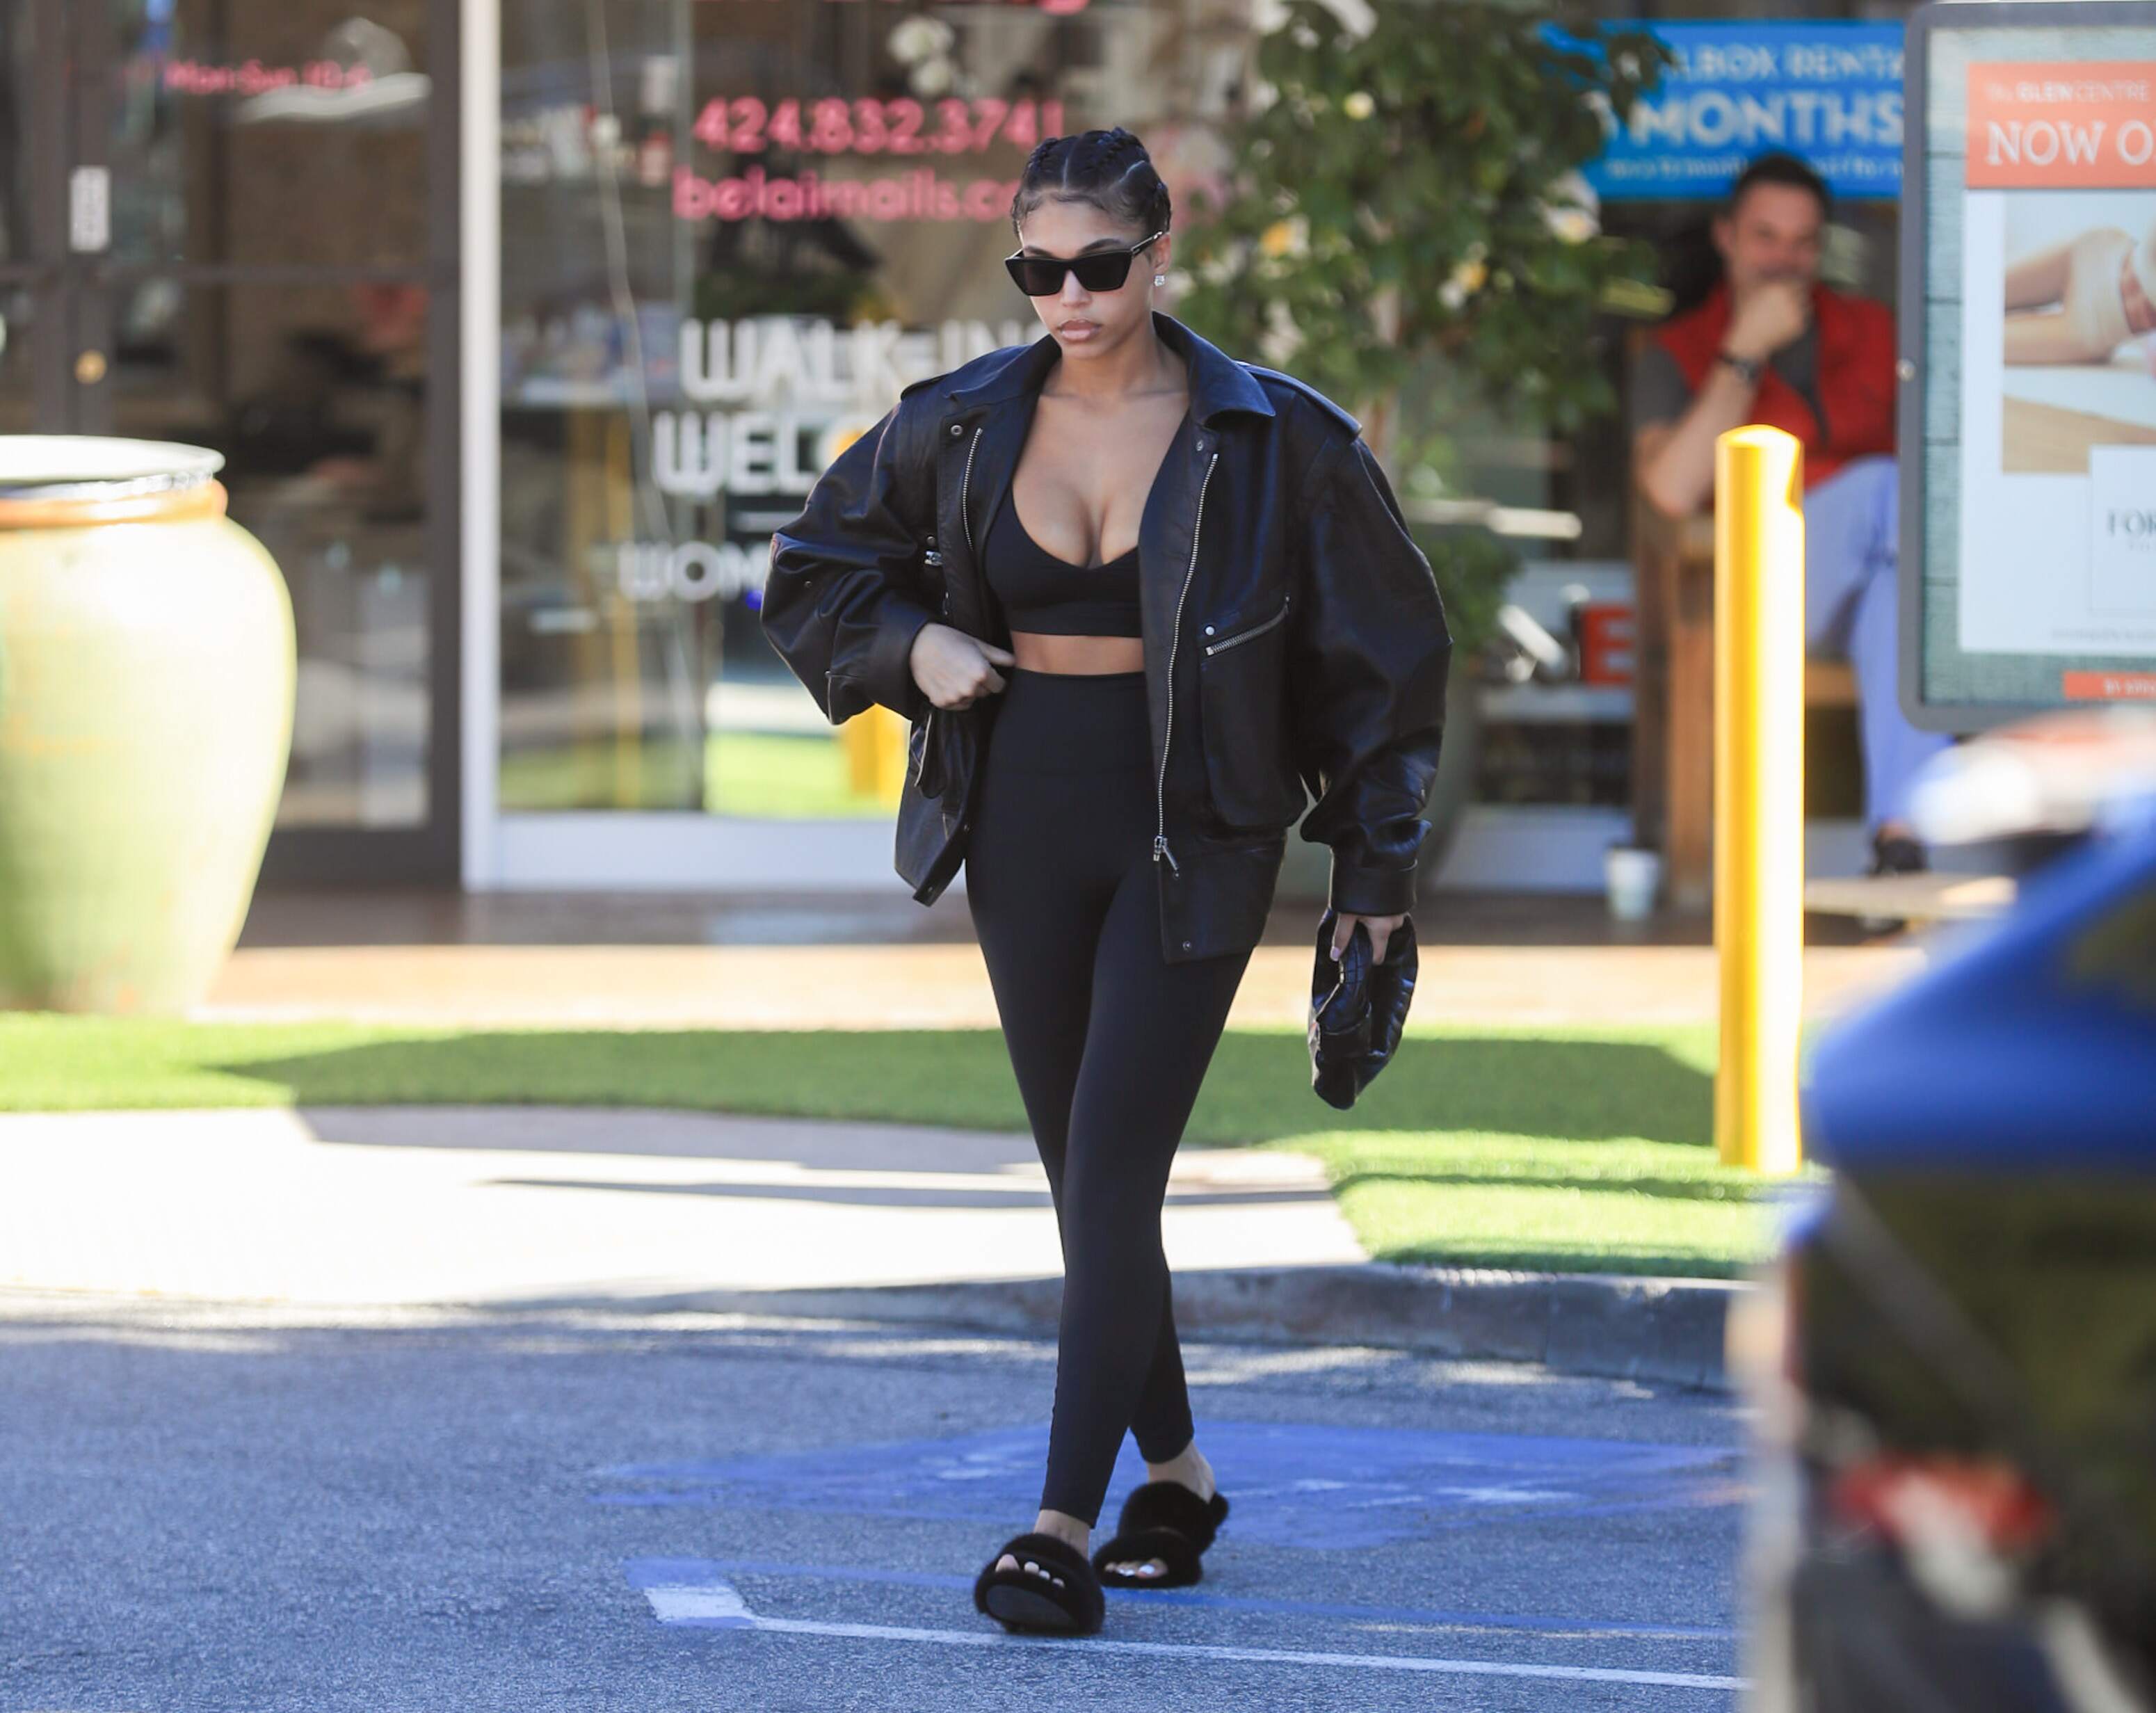 Model Lori Harvey picks up an iced coffee on a sunny day in LA while wearing a leather jacket and black leggings